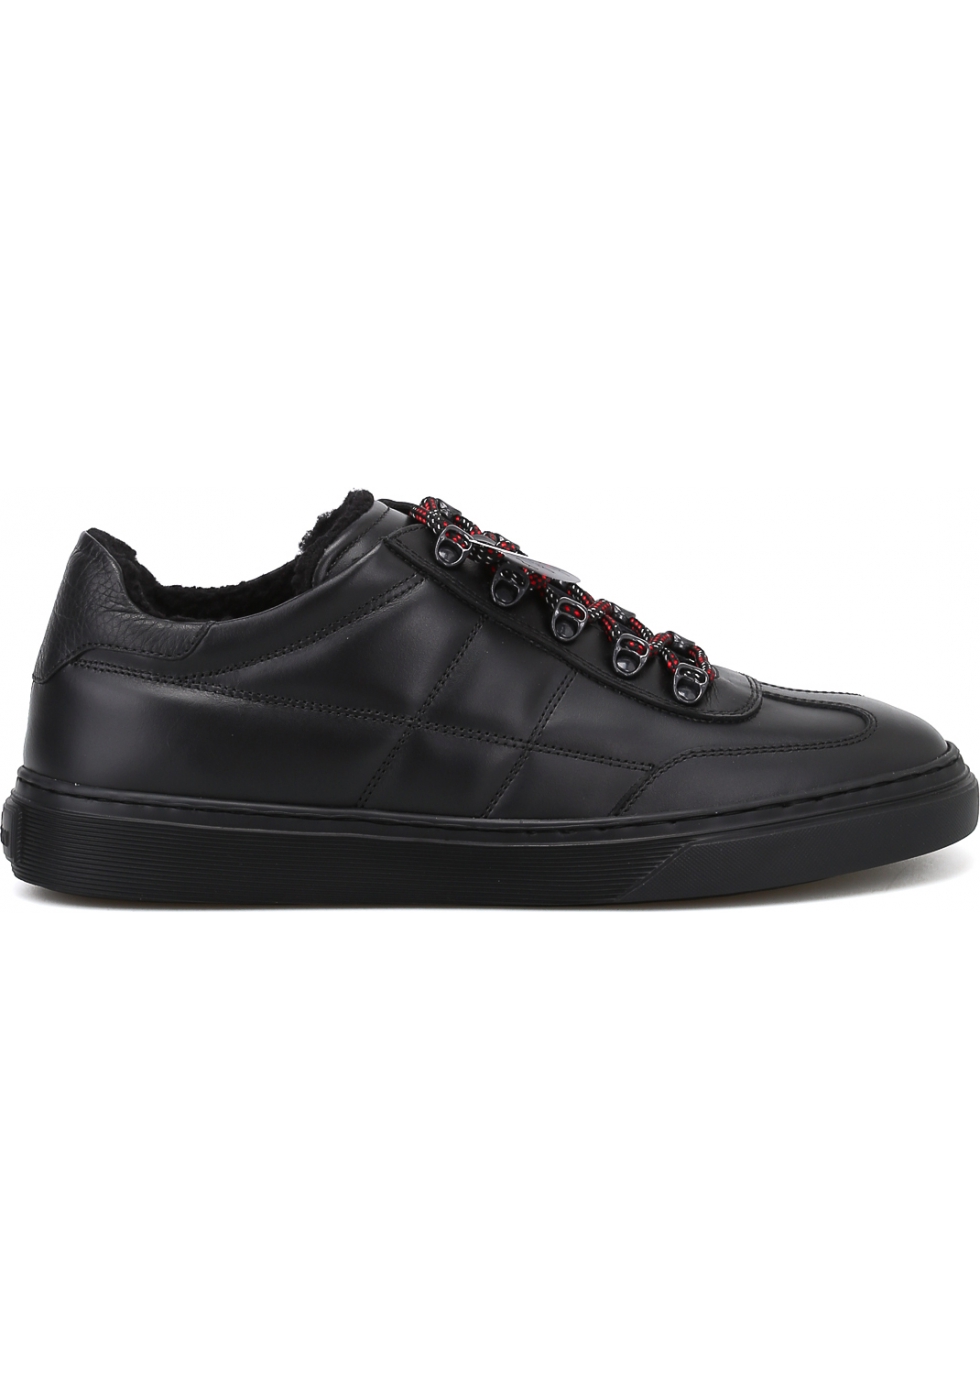 Hogan Men's fashion round toe sneakers in black leather with red laces ...